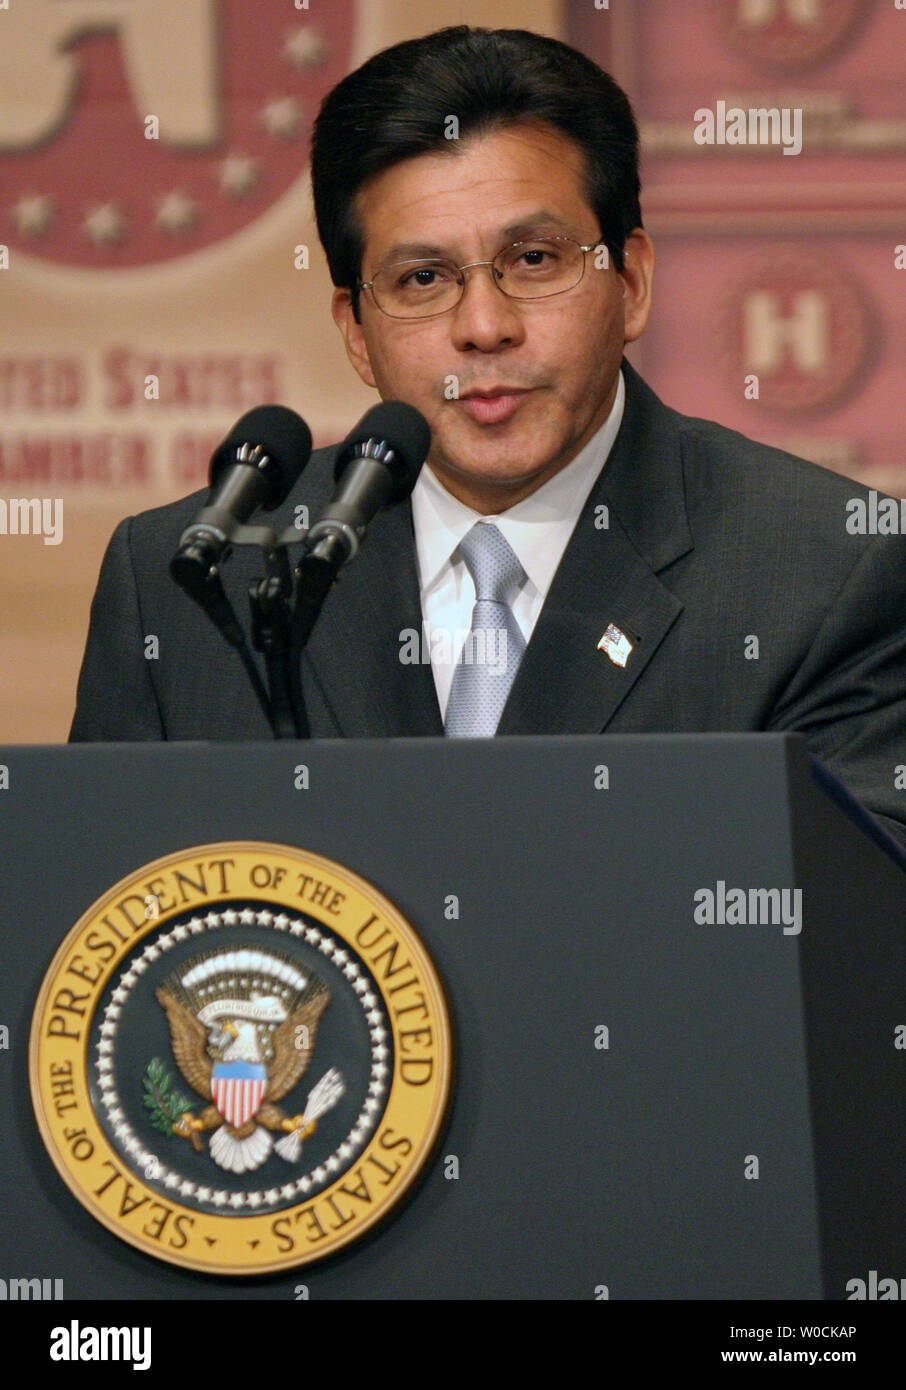 Attorney General Alberto Gonzales introduces President George W. Bush, at the Hispanic Chamber of Commerce briefing on April 20, 2005 at the Ronald Regan Building in Washington, DC. (UPI Photo/Kevin Dietsch) Stock Photo